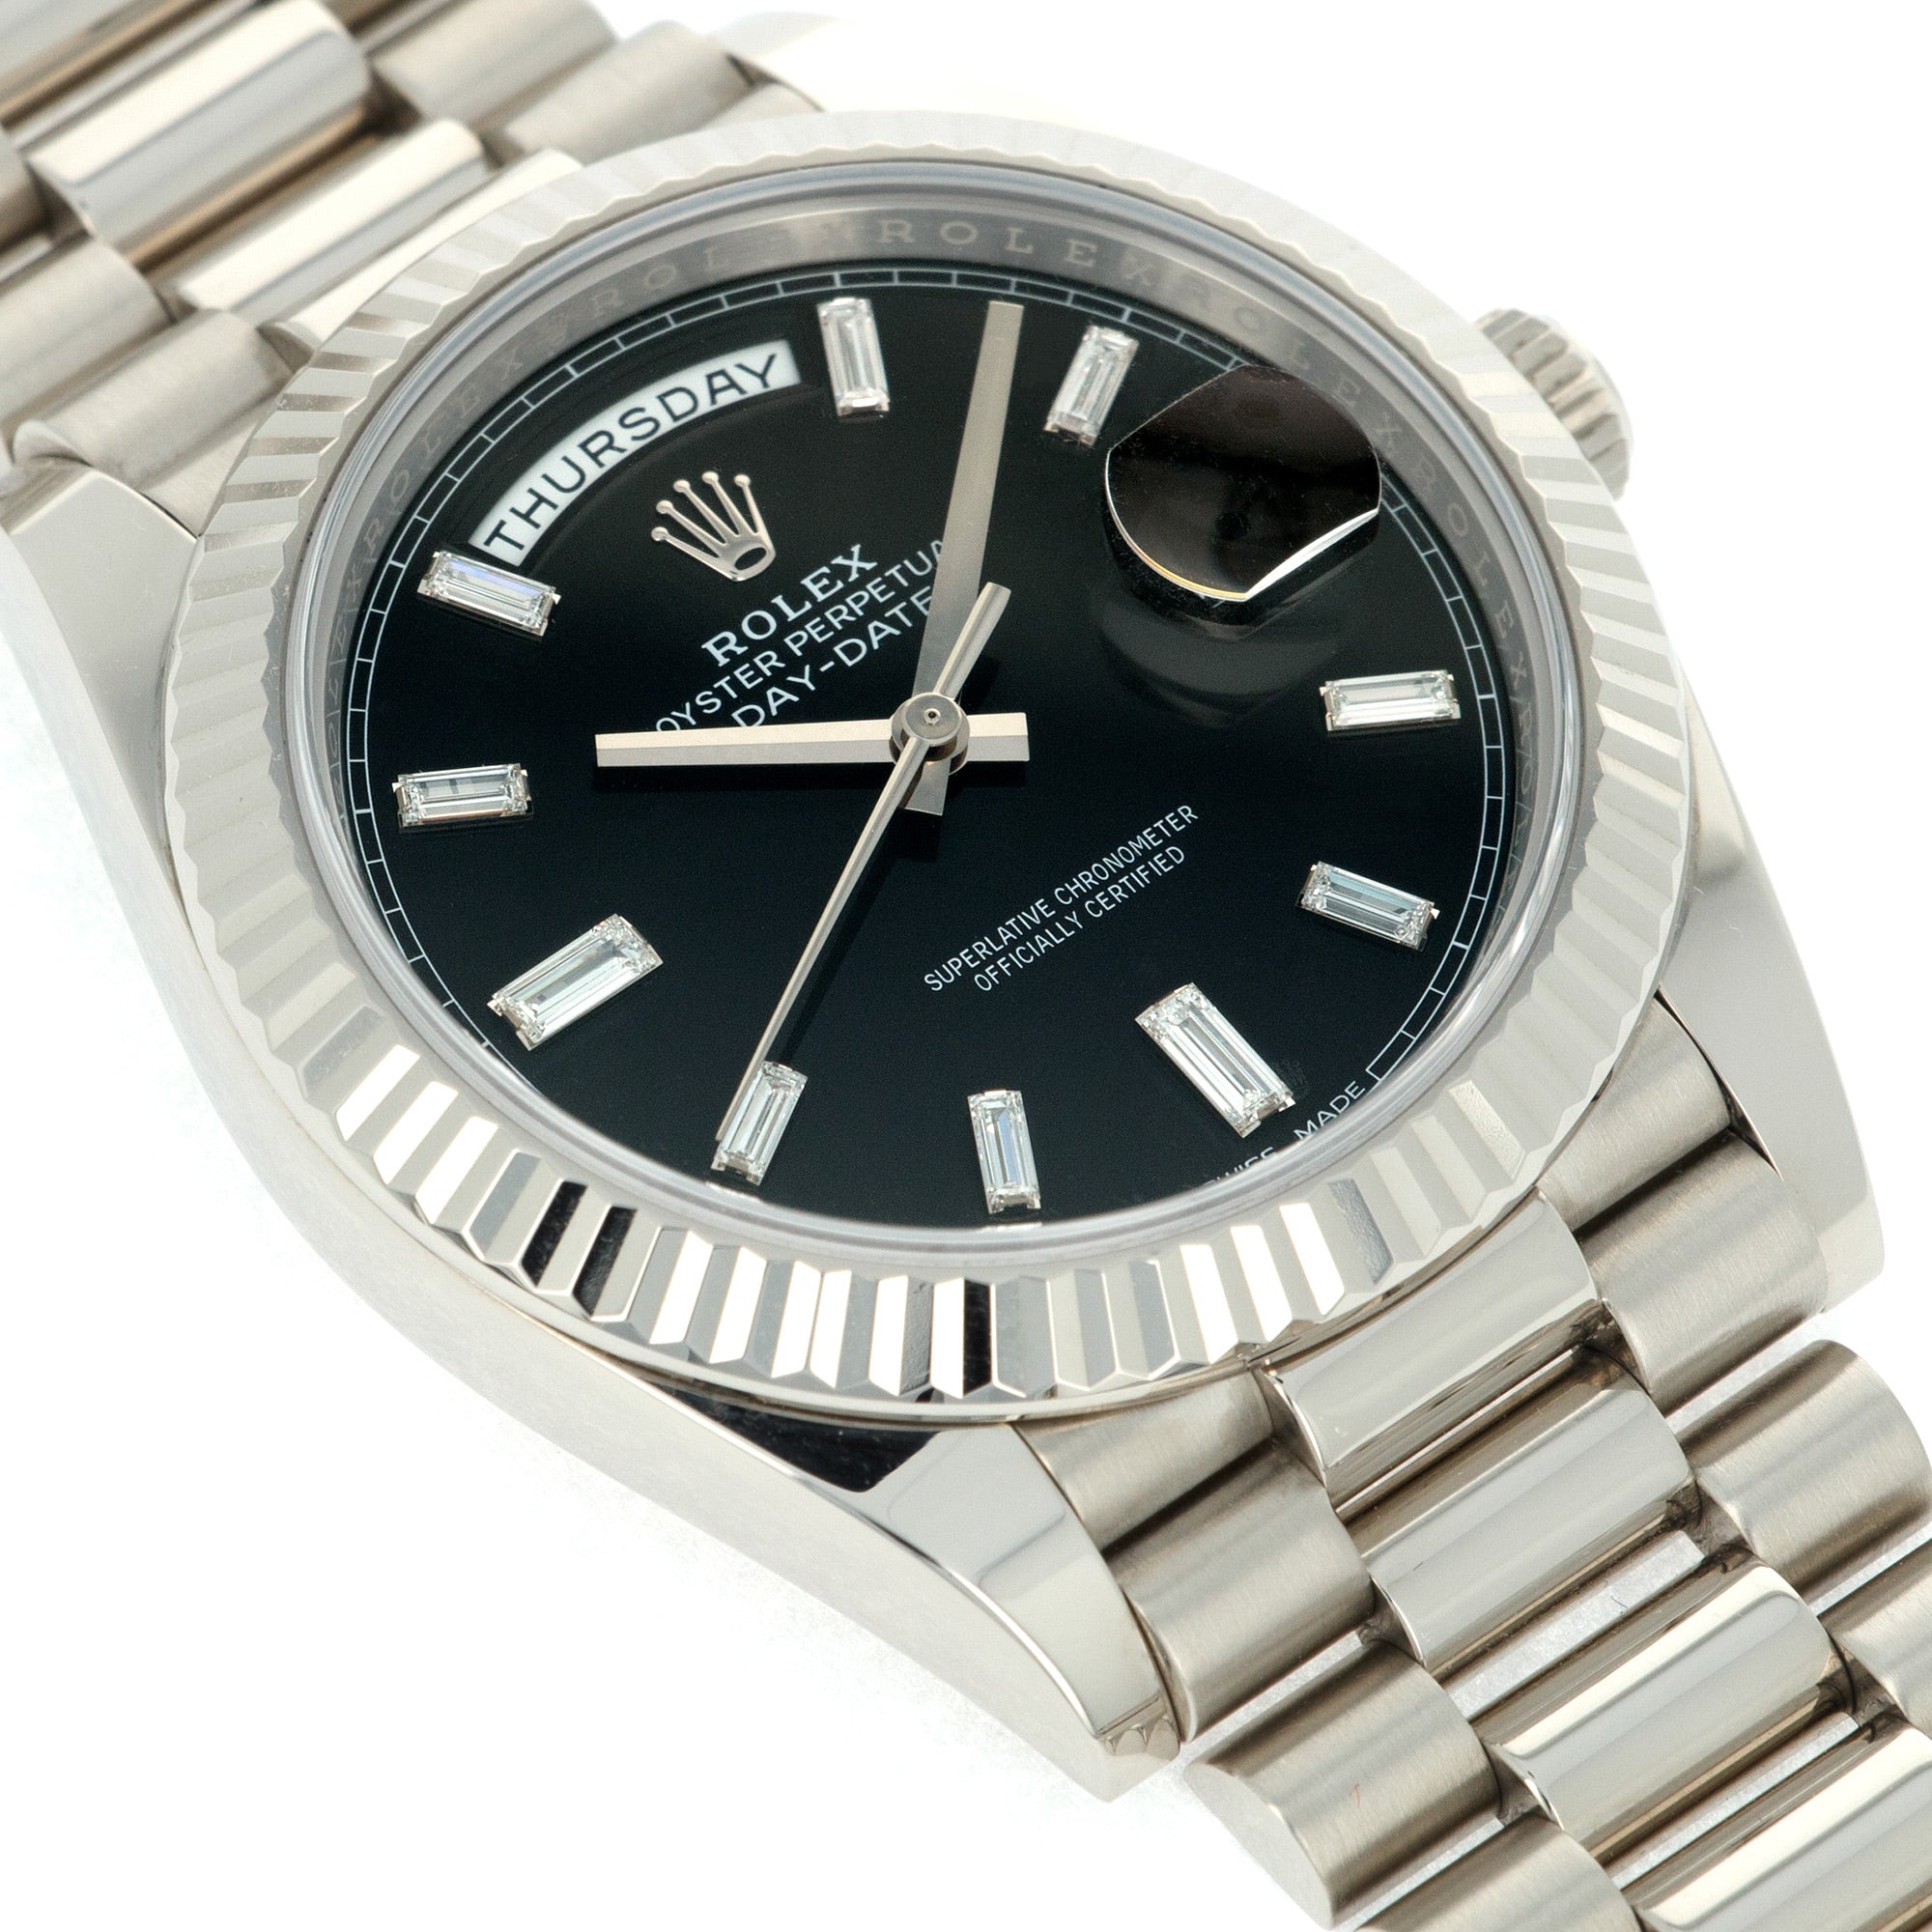 Rolex - Rolex Day-Date white gold baguette diamond dial ref. 228239 - The Keystone Watches